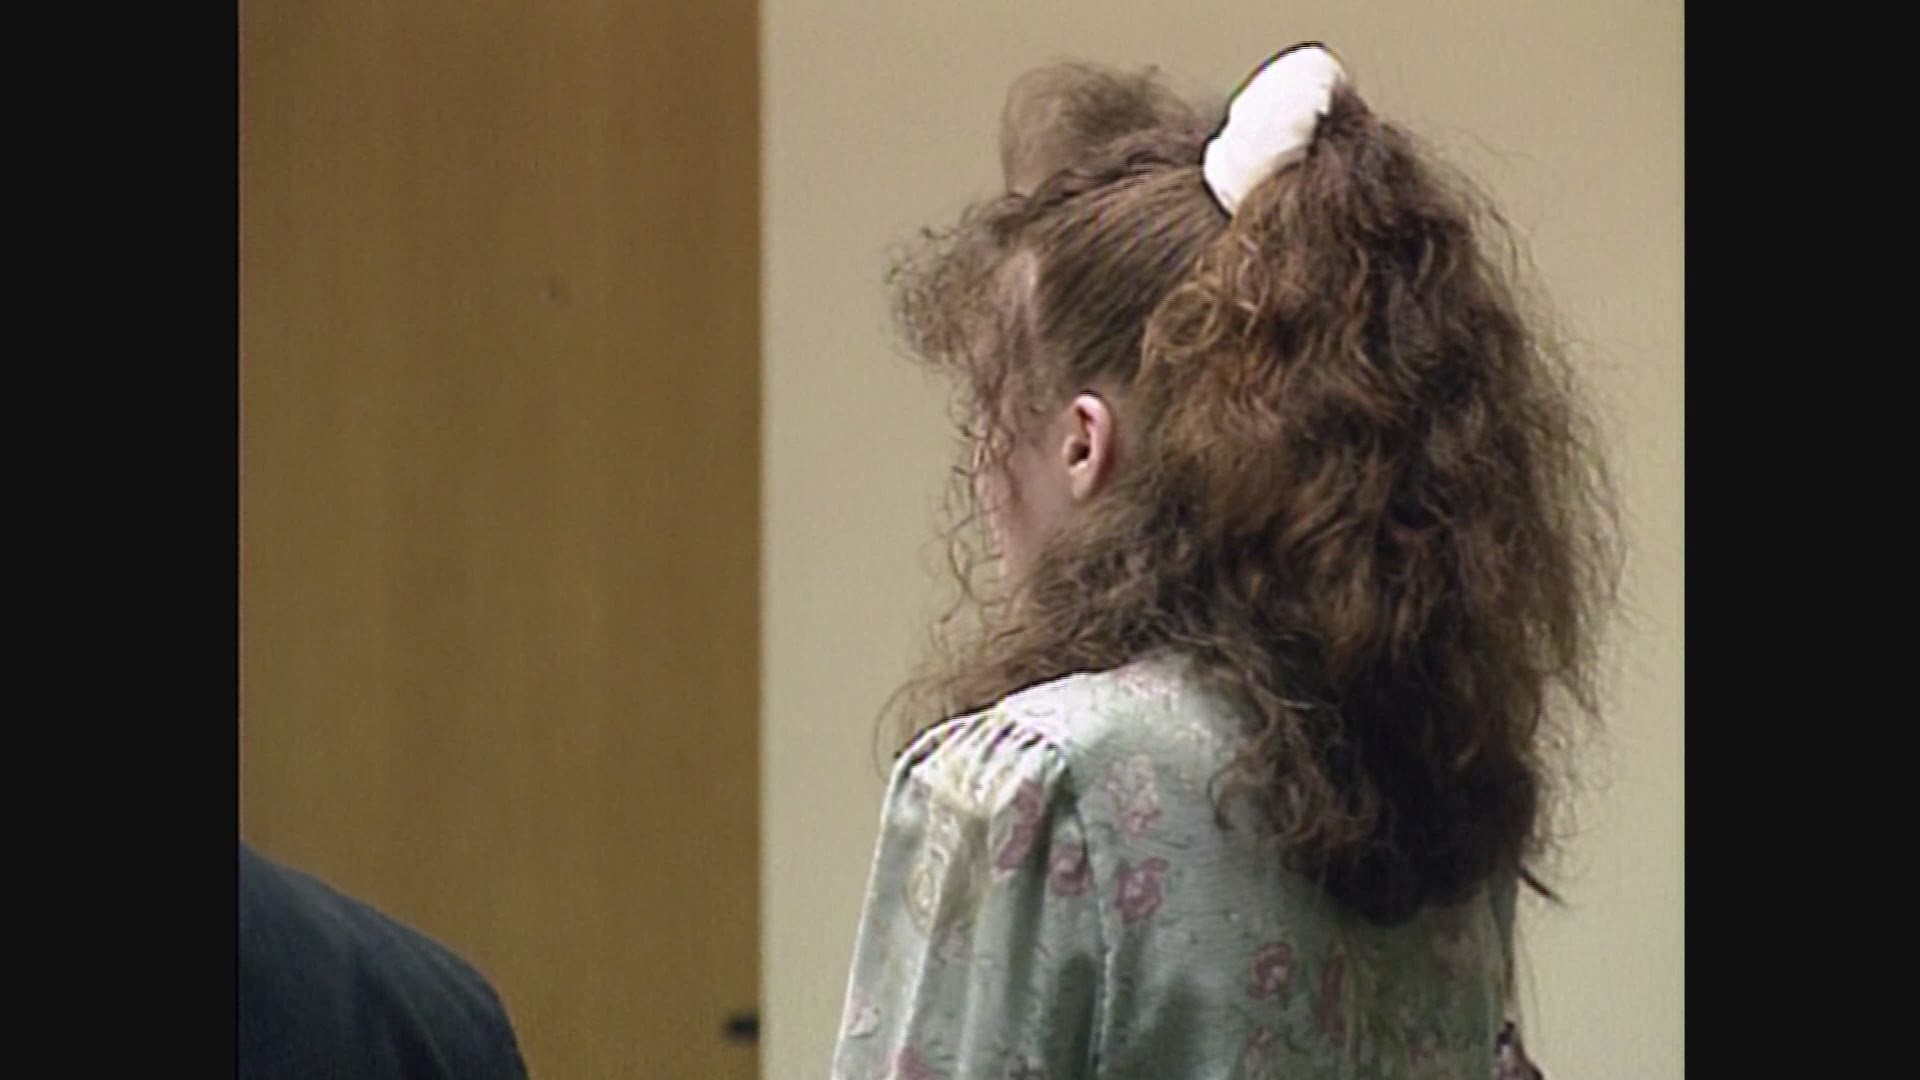 Christa Pike cries after receiving the death penalty. She wanted to hug her mother. (Video taken on March 30, 1996)